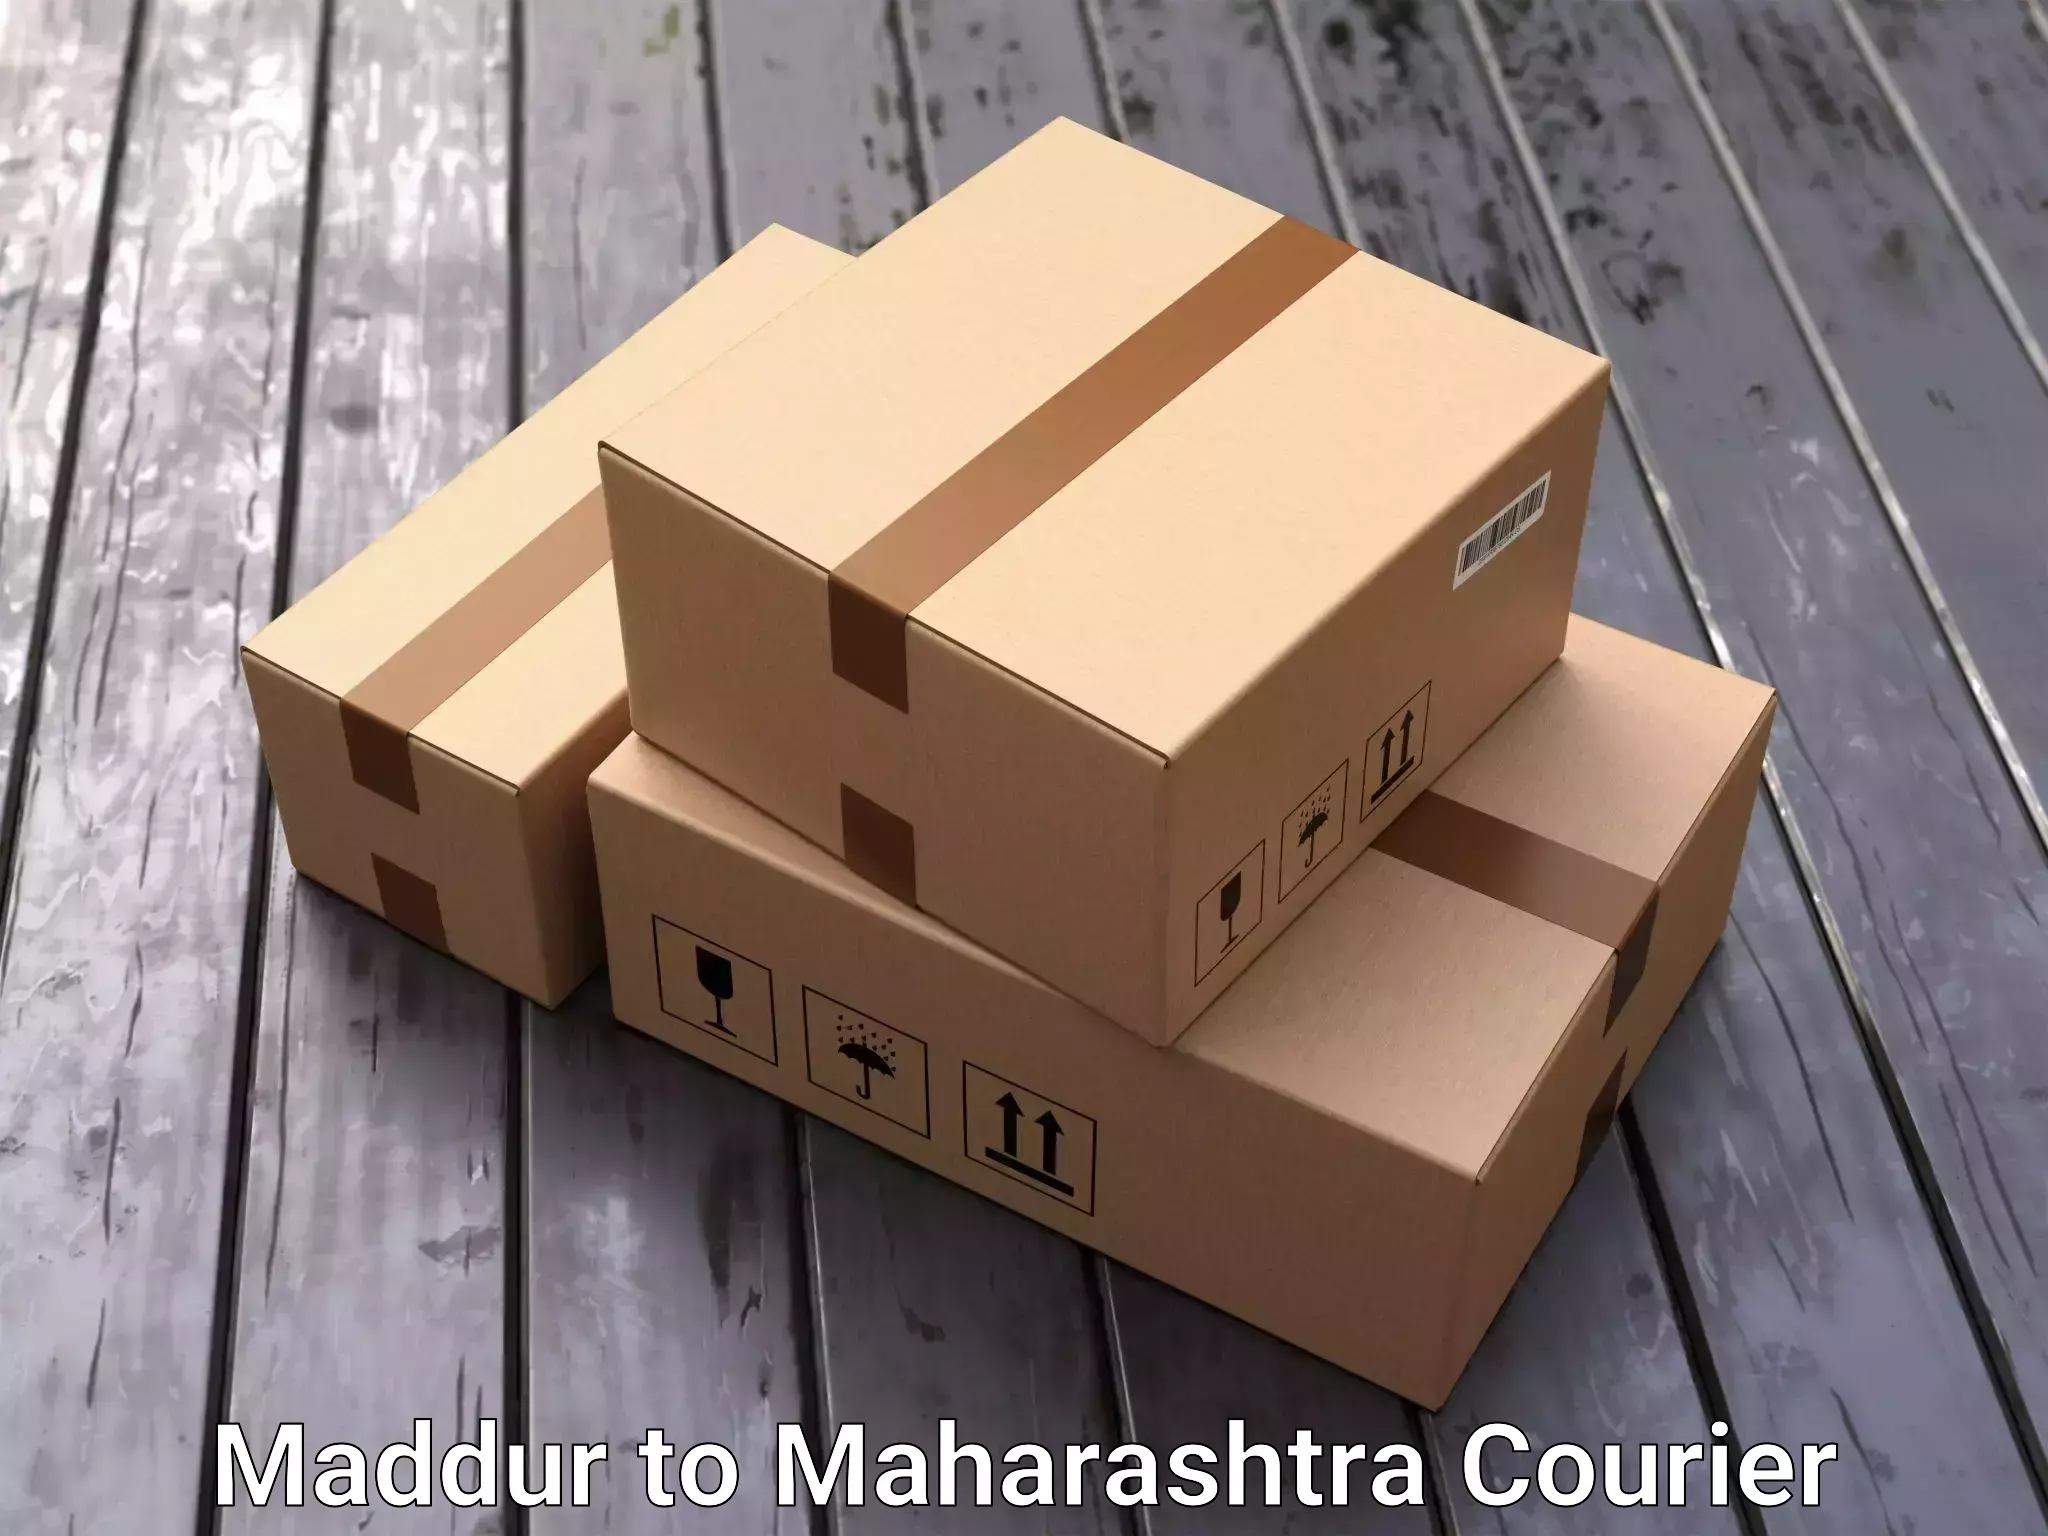 Expert household relocation in Maddur to Maharashtra